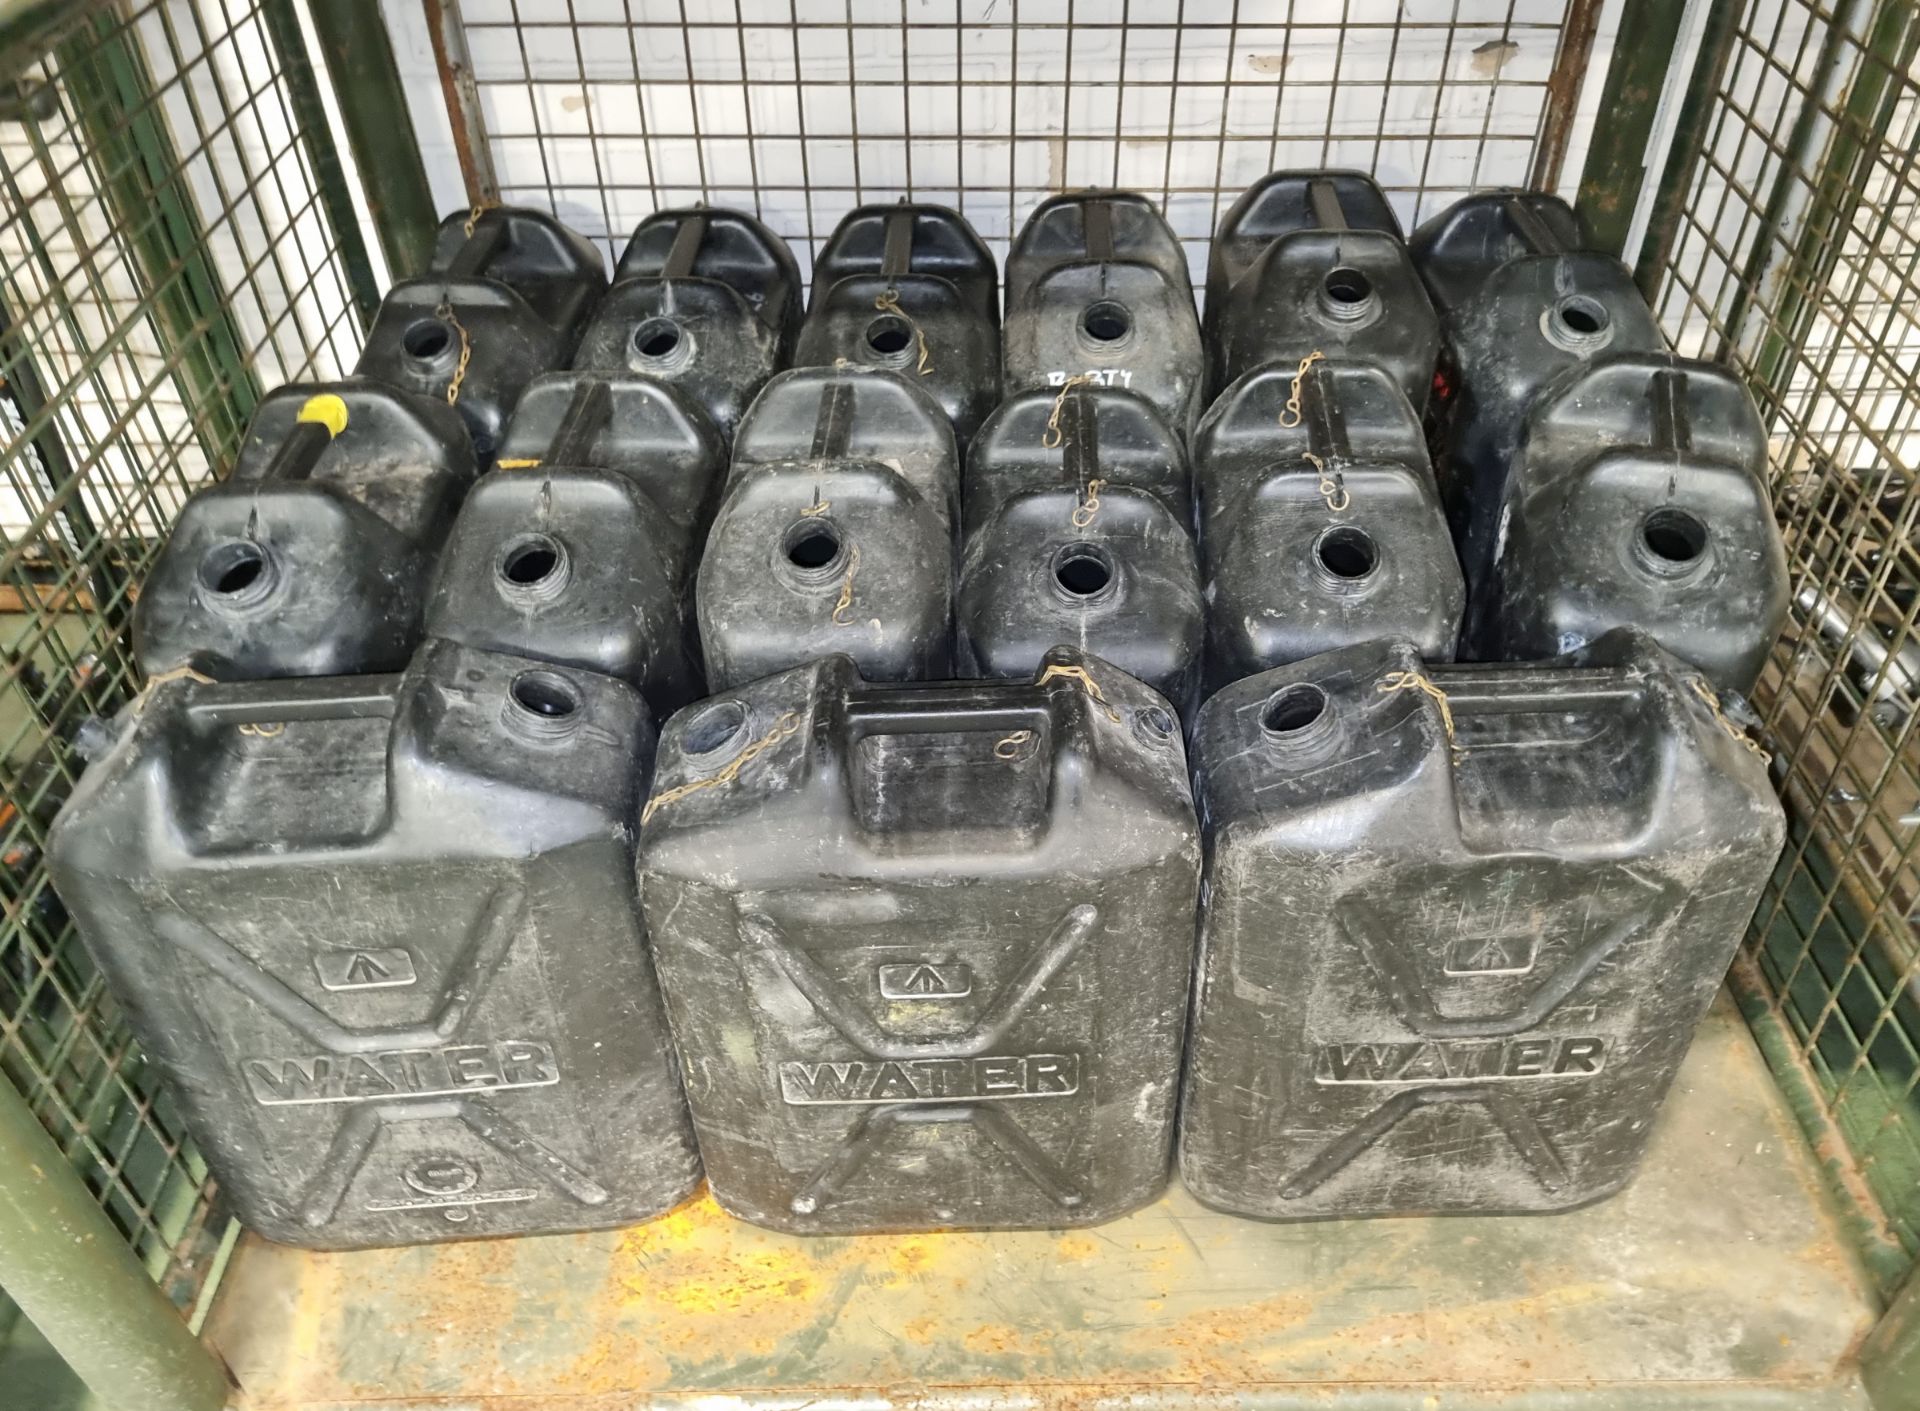 15x 20 litre plastic water containers - NO CAPS - Image 2 of 4